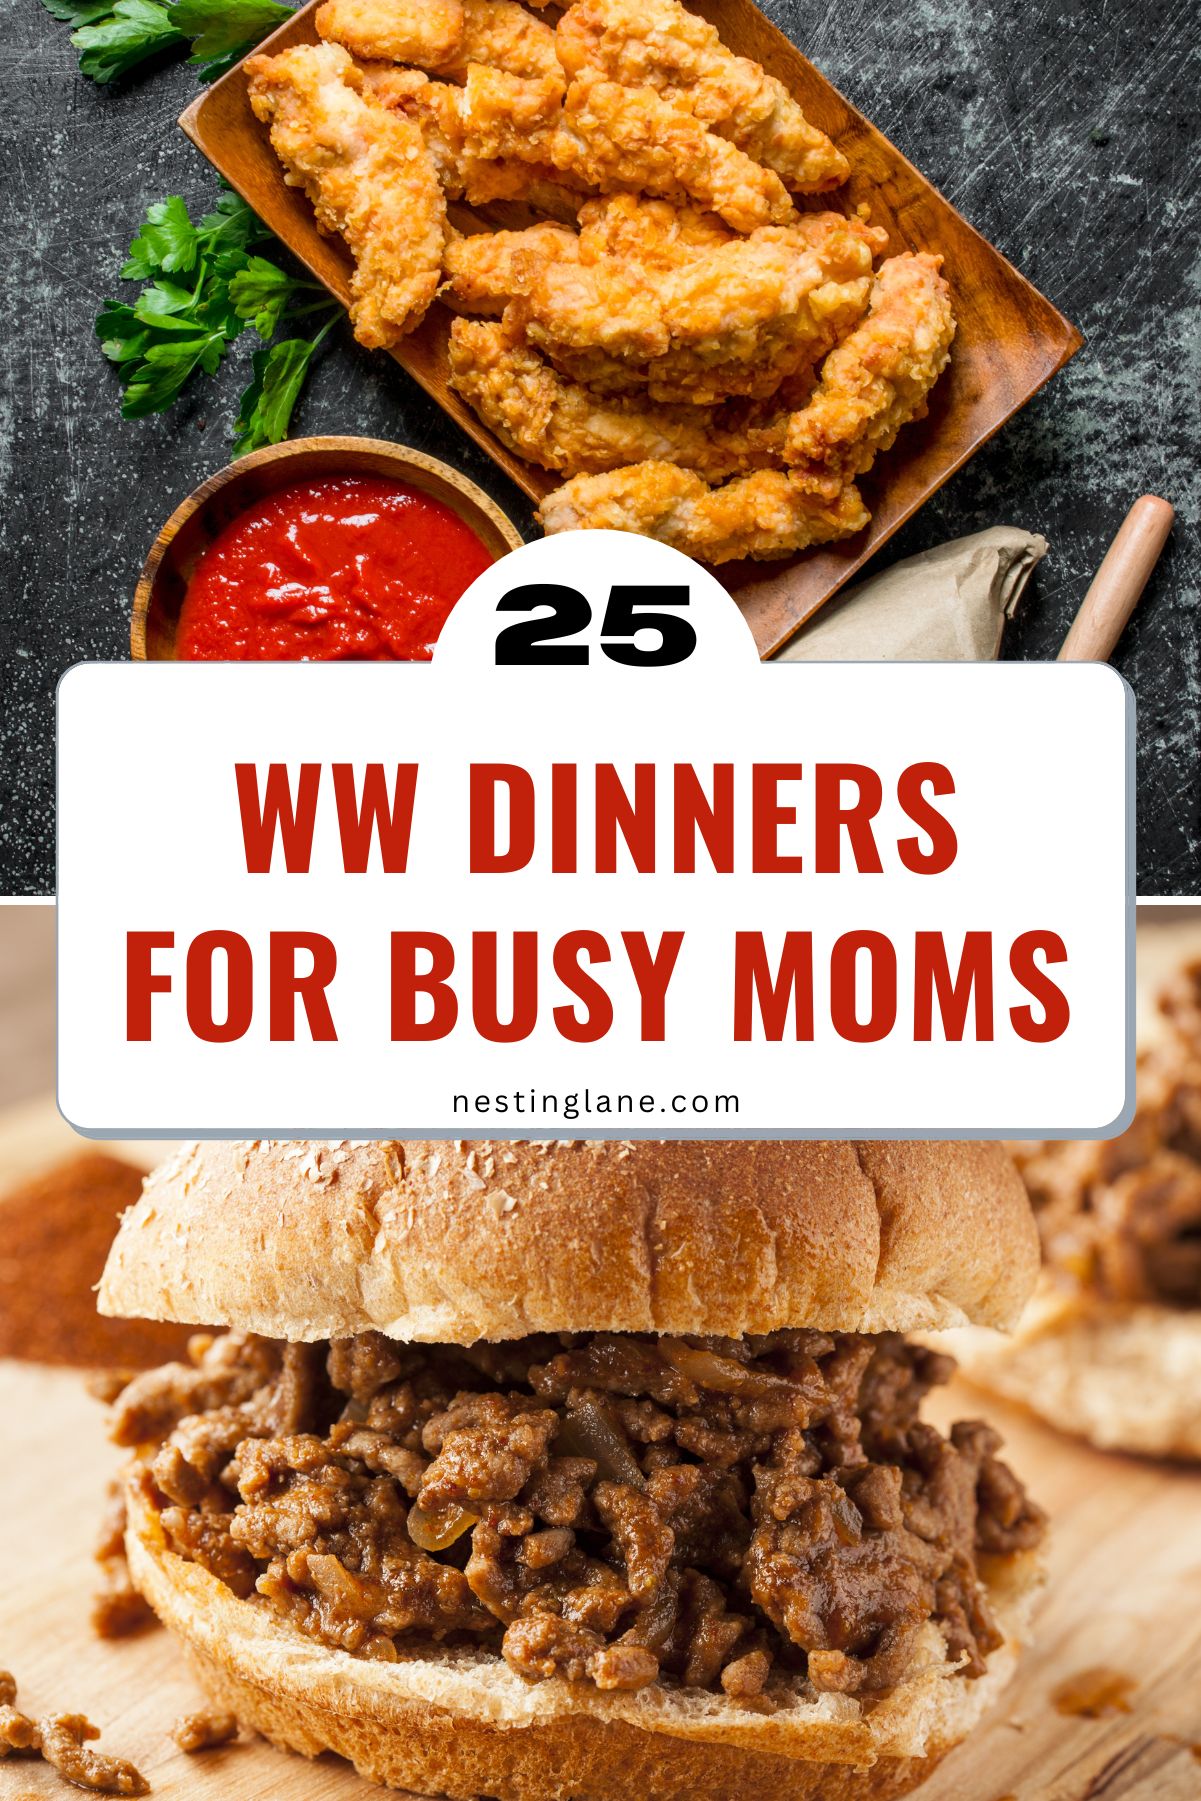 25 WW Dinners for Busy Moms Graphic.